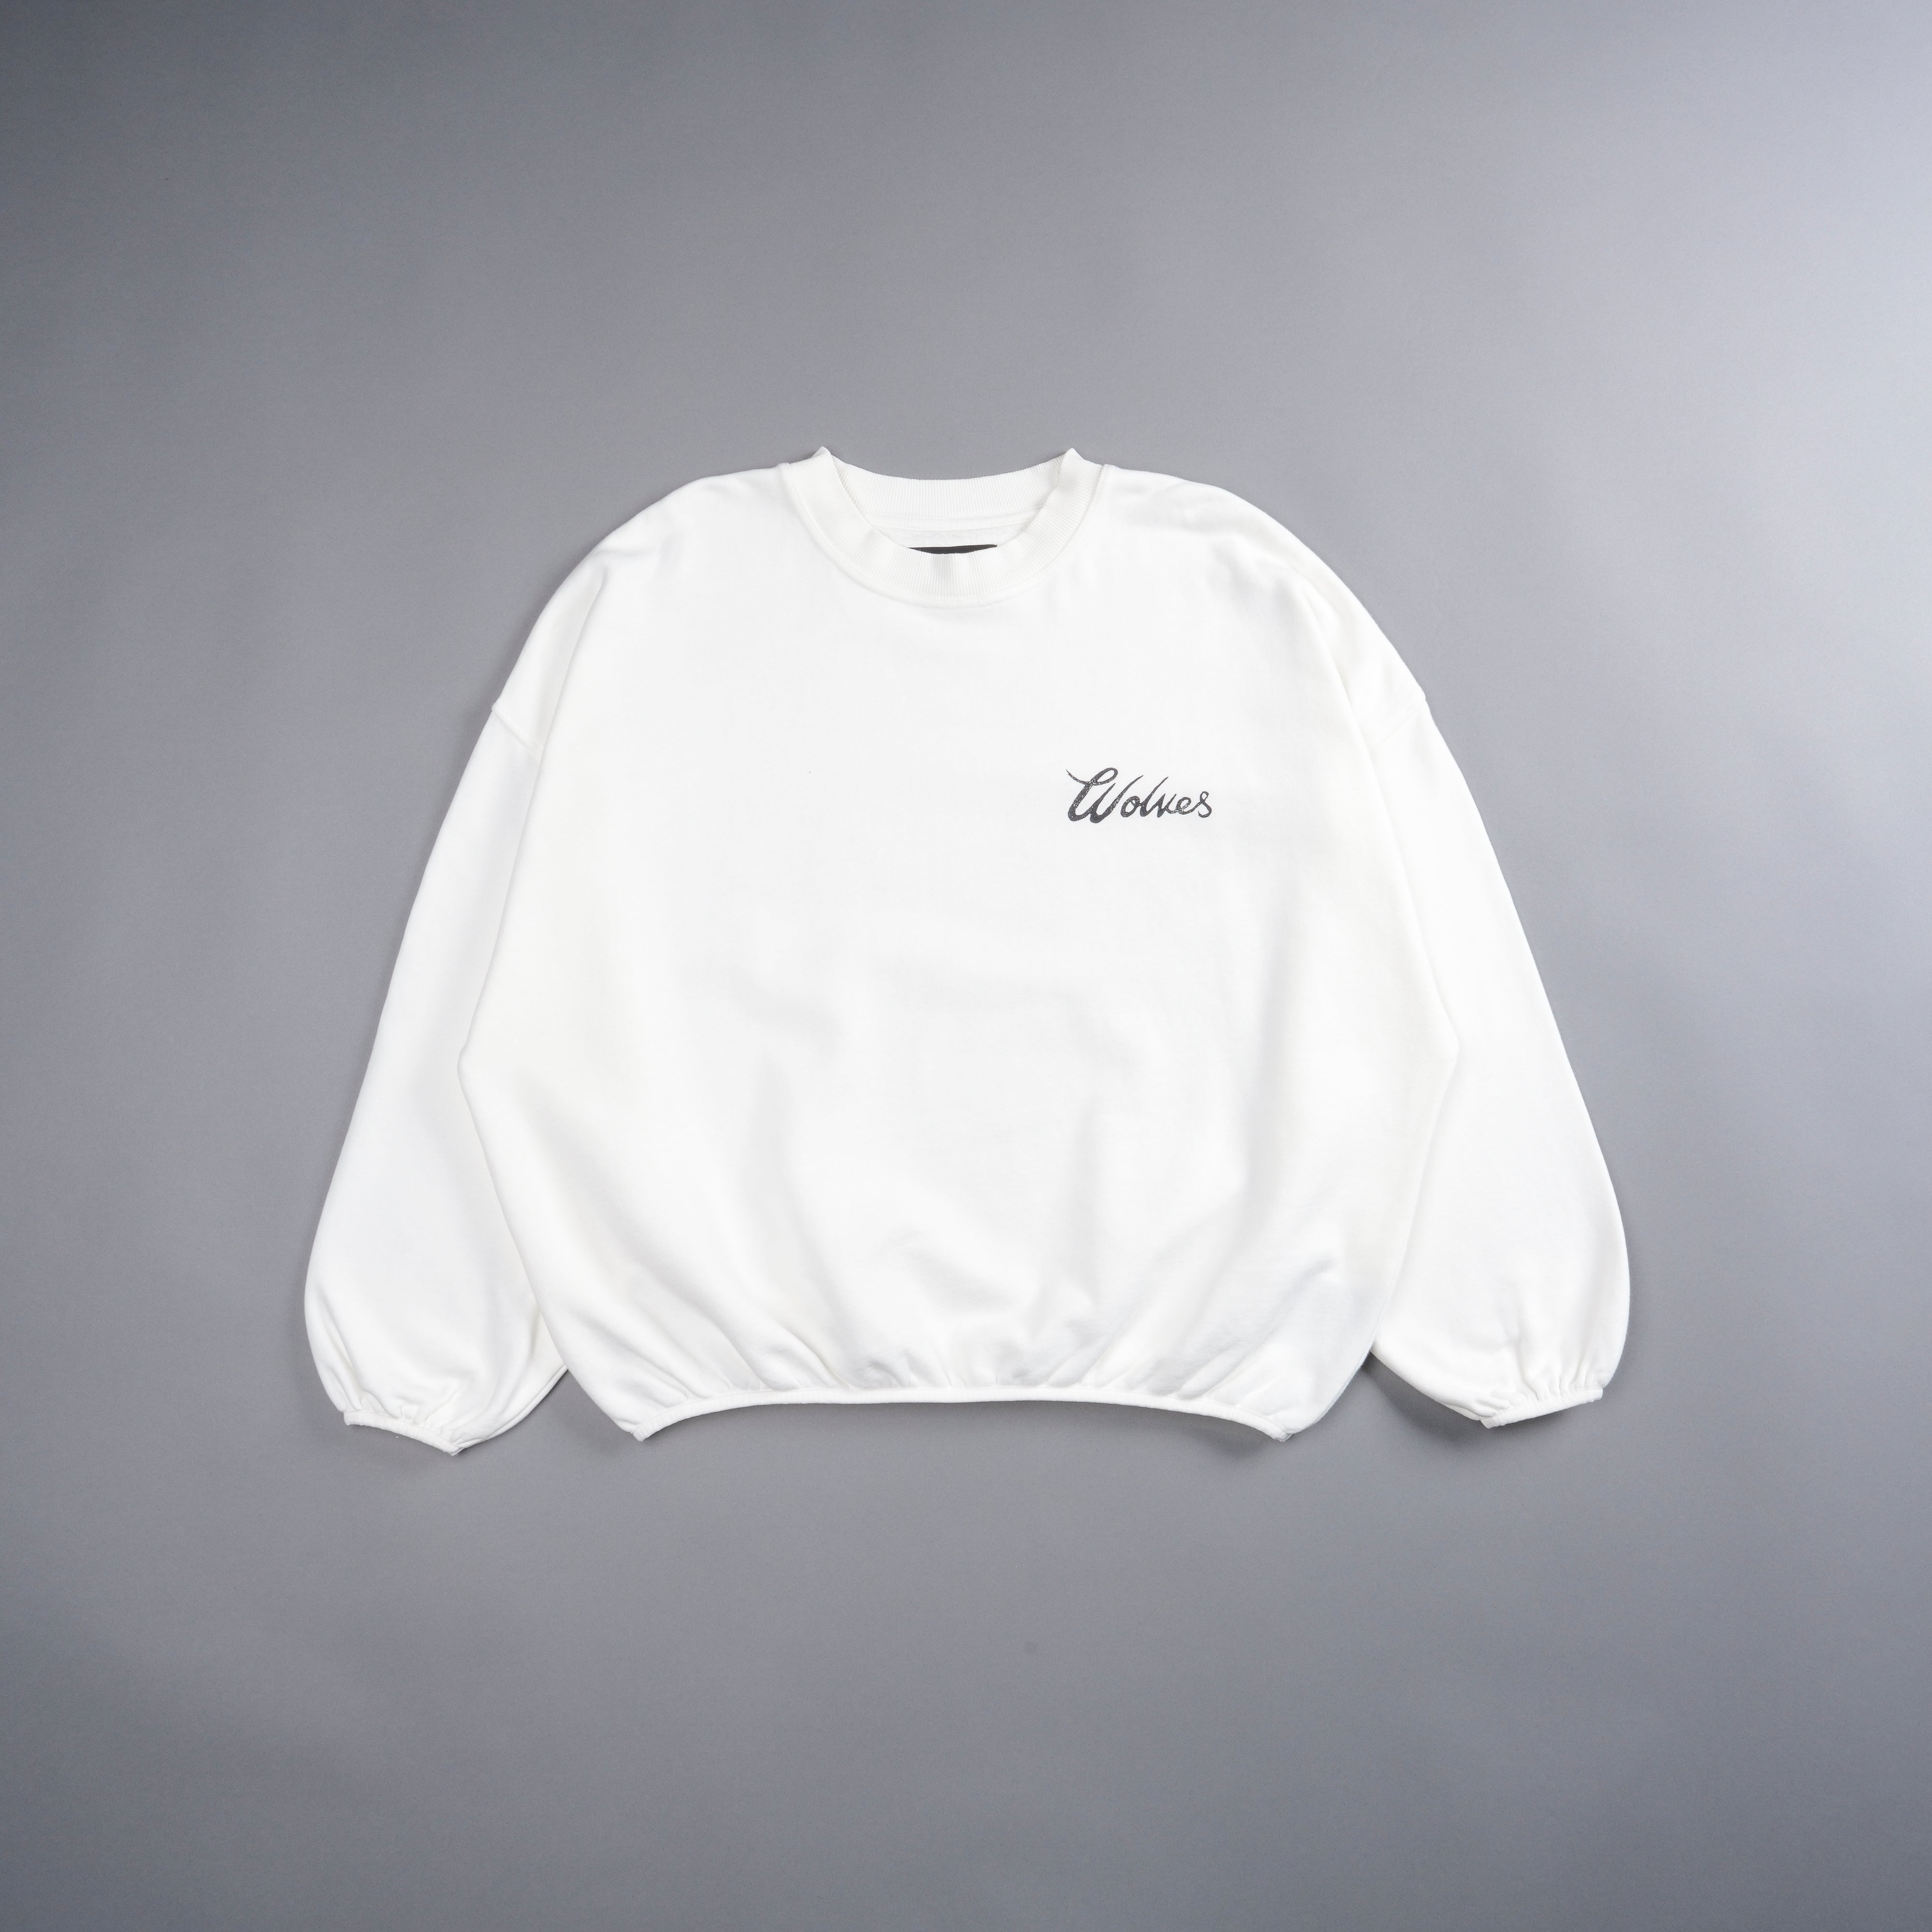 Our Tale S. Hall Unisex Crewneck in Cream